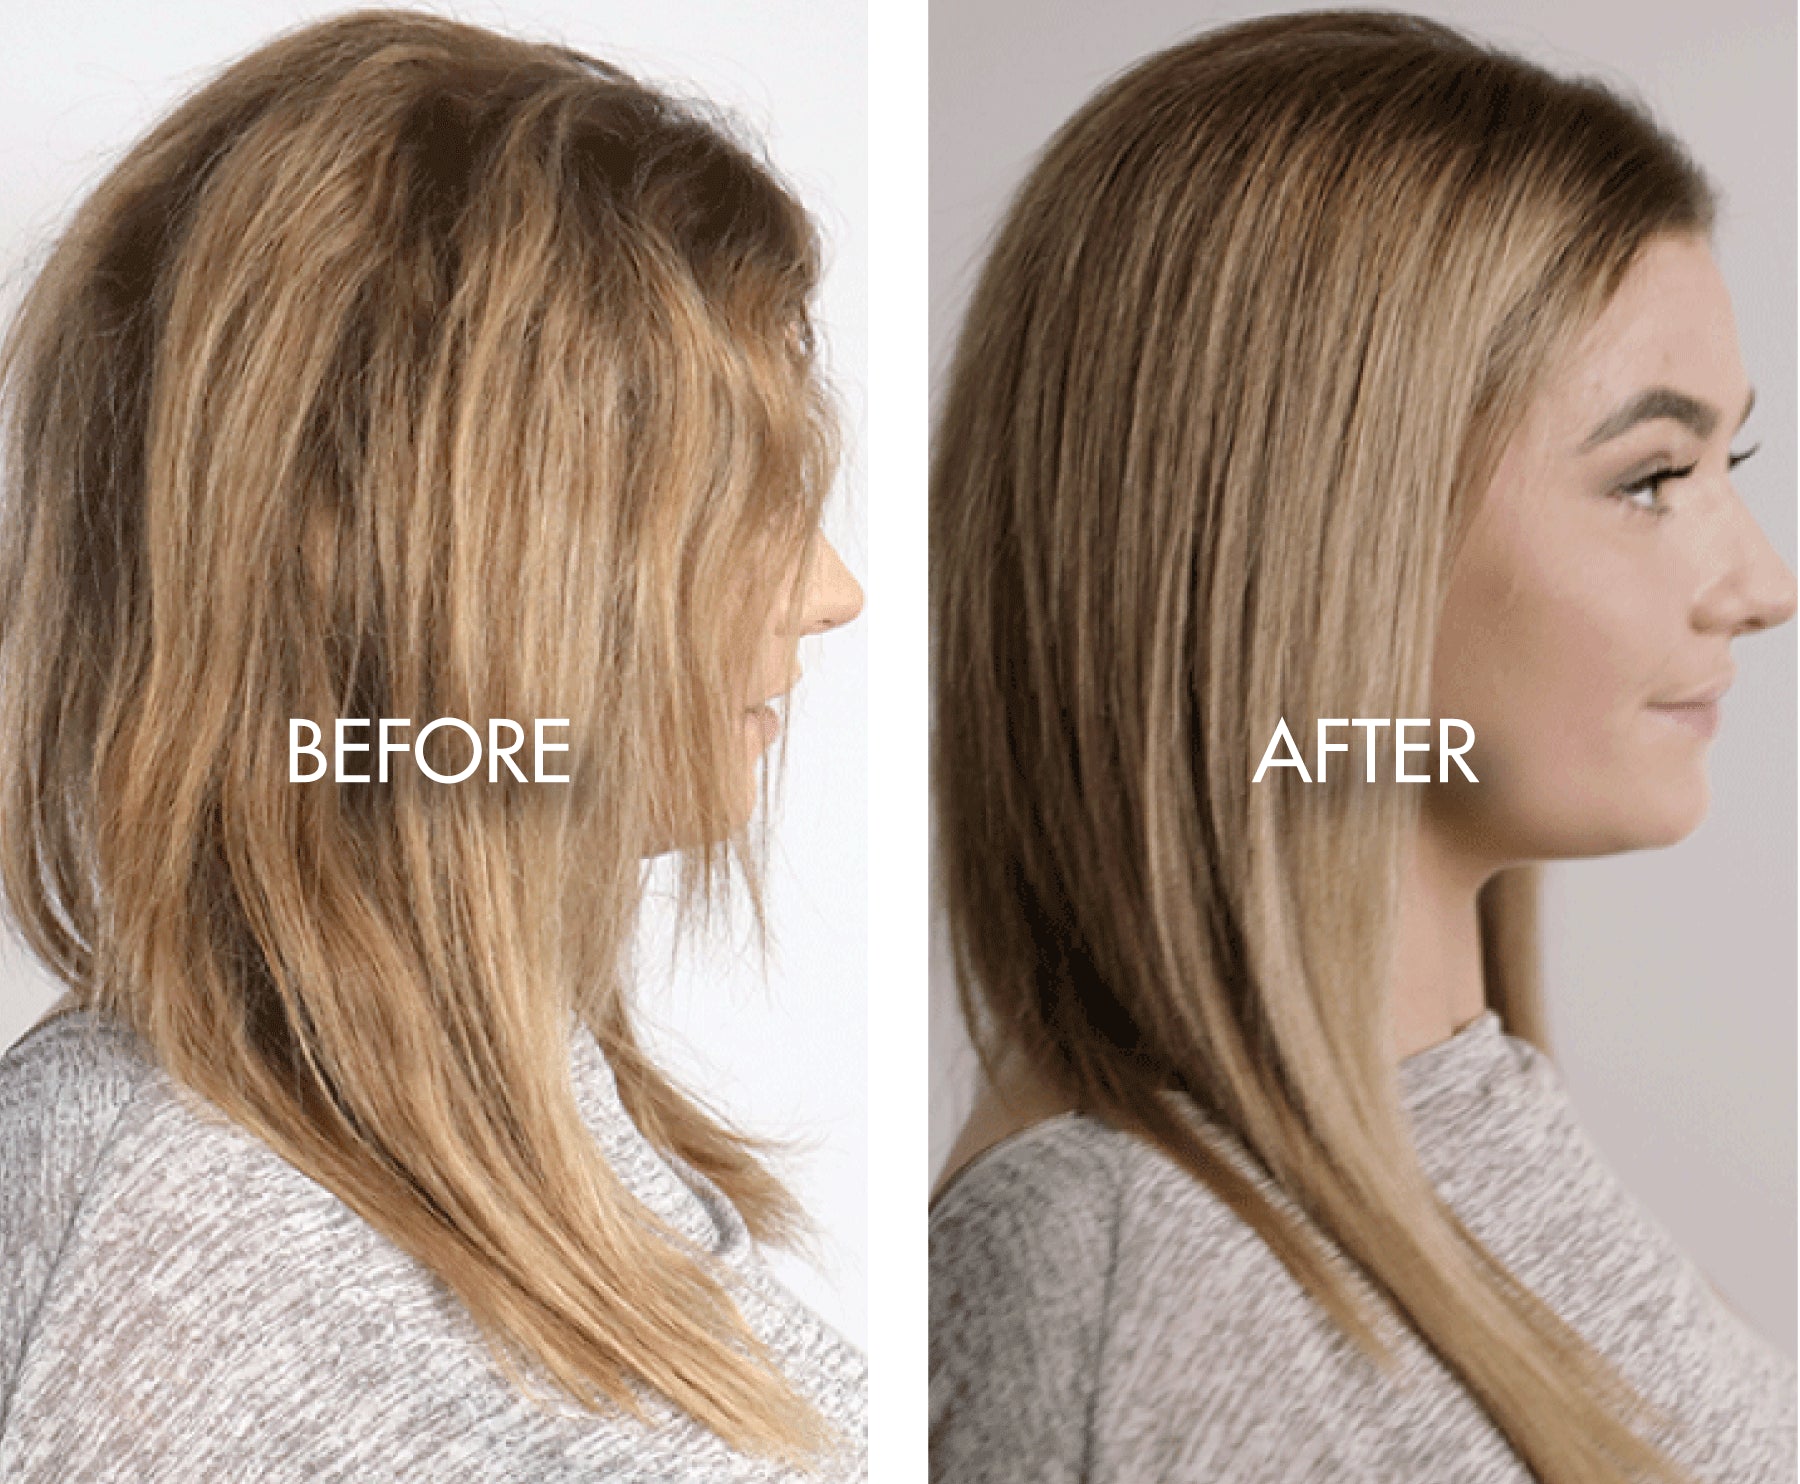 Smoothing Treatment - SMOOTH